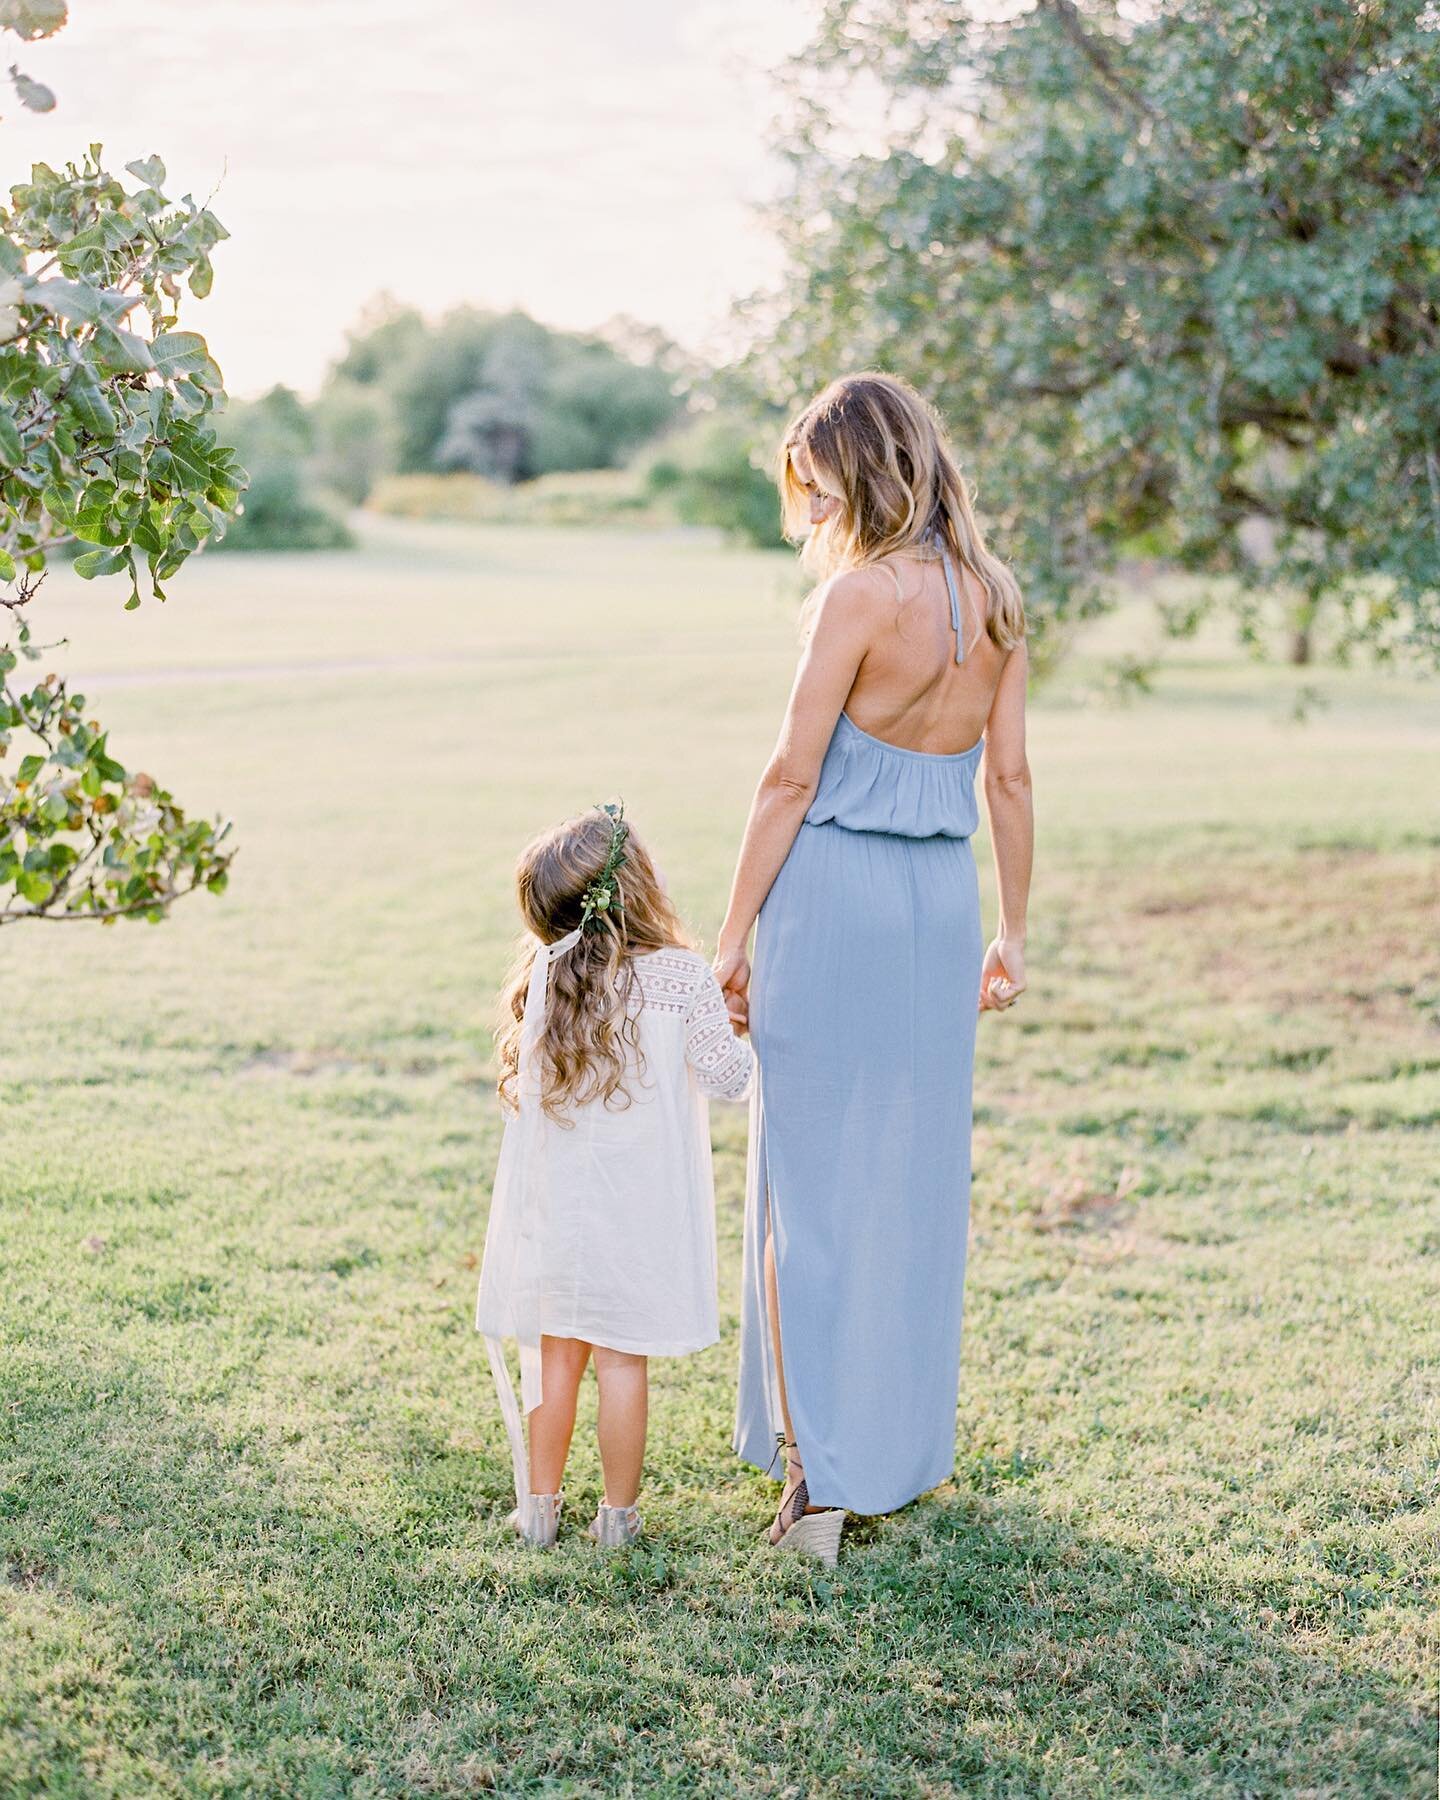 ✨Mom and daughter photos are always so peaceful and pure.
⠀⠀⠀⠀⠀⠀⠀⠀⠀
Happy Mother's Day 💕